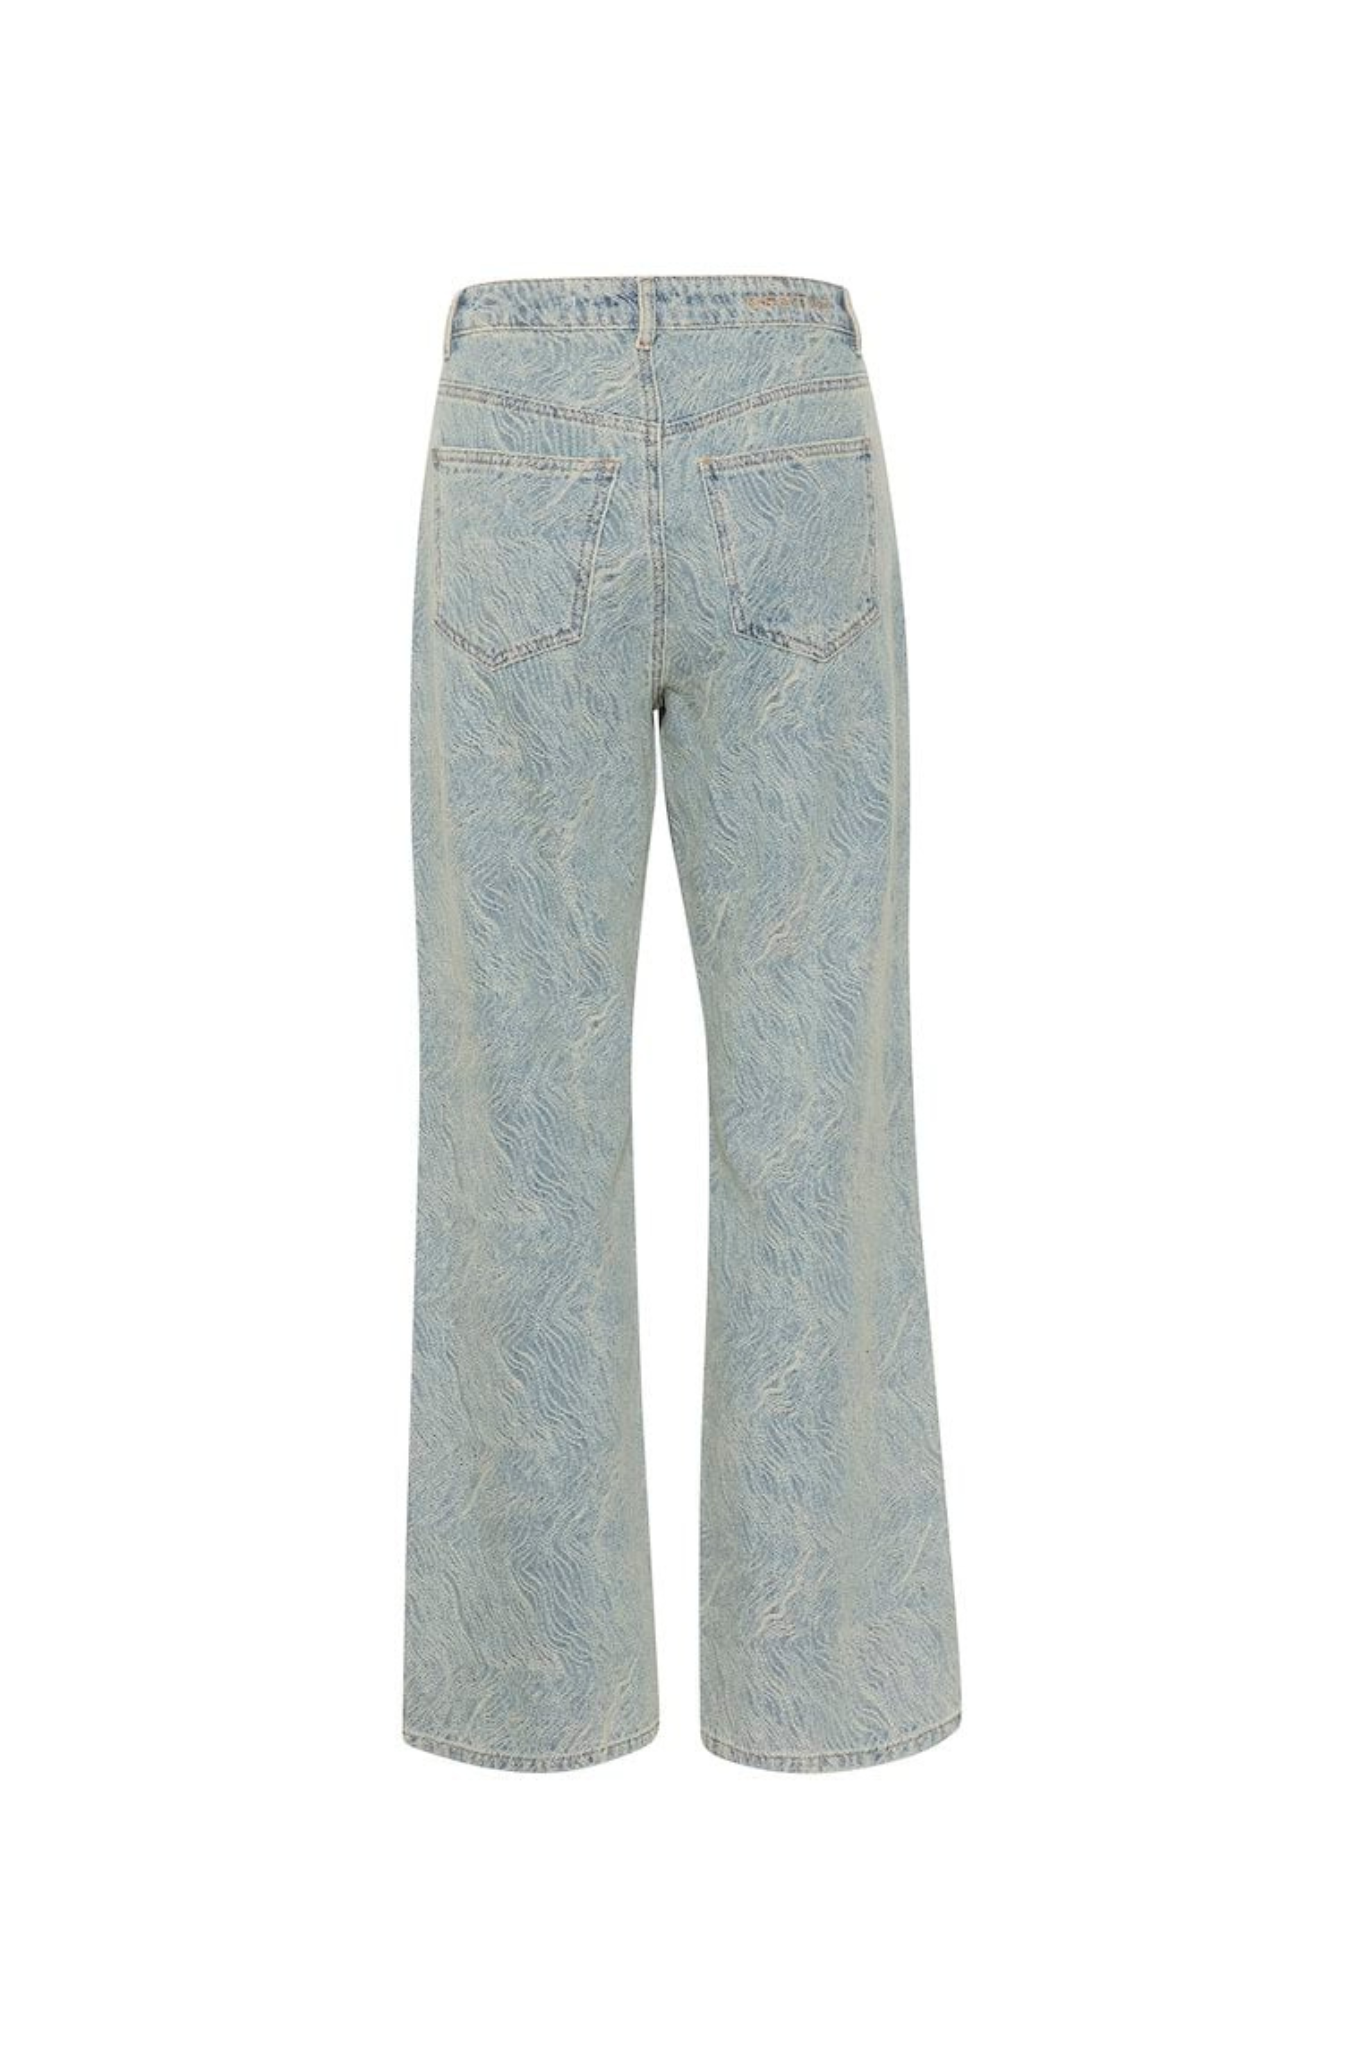 GIANNA WIDE JEANS - BLUE/WHITE MARBLE